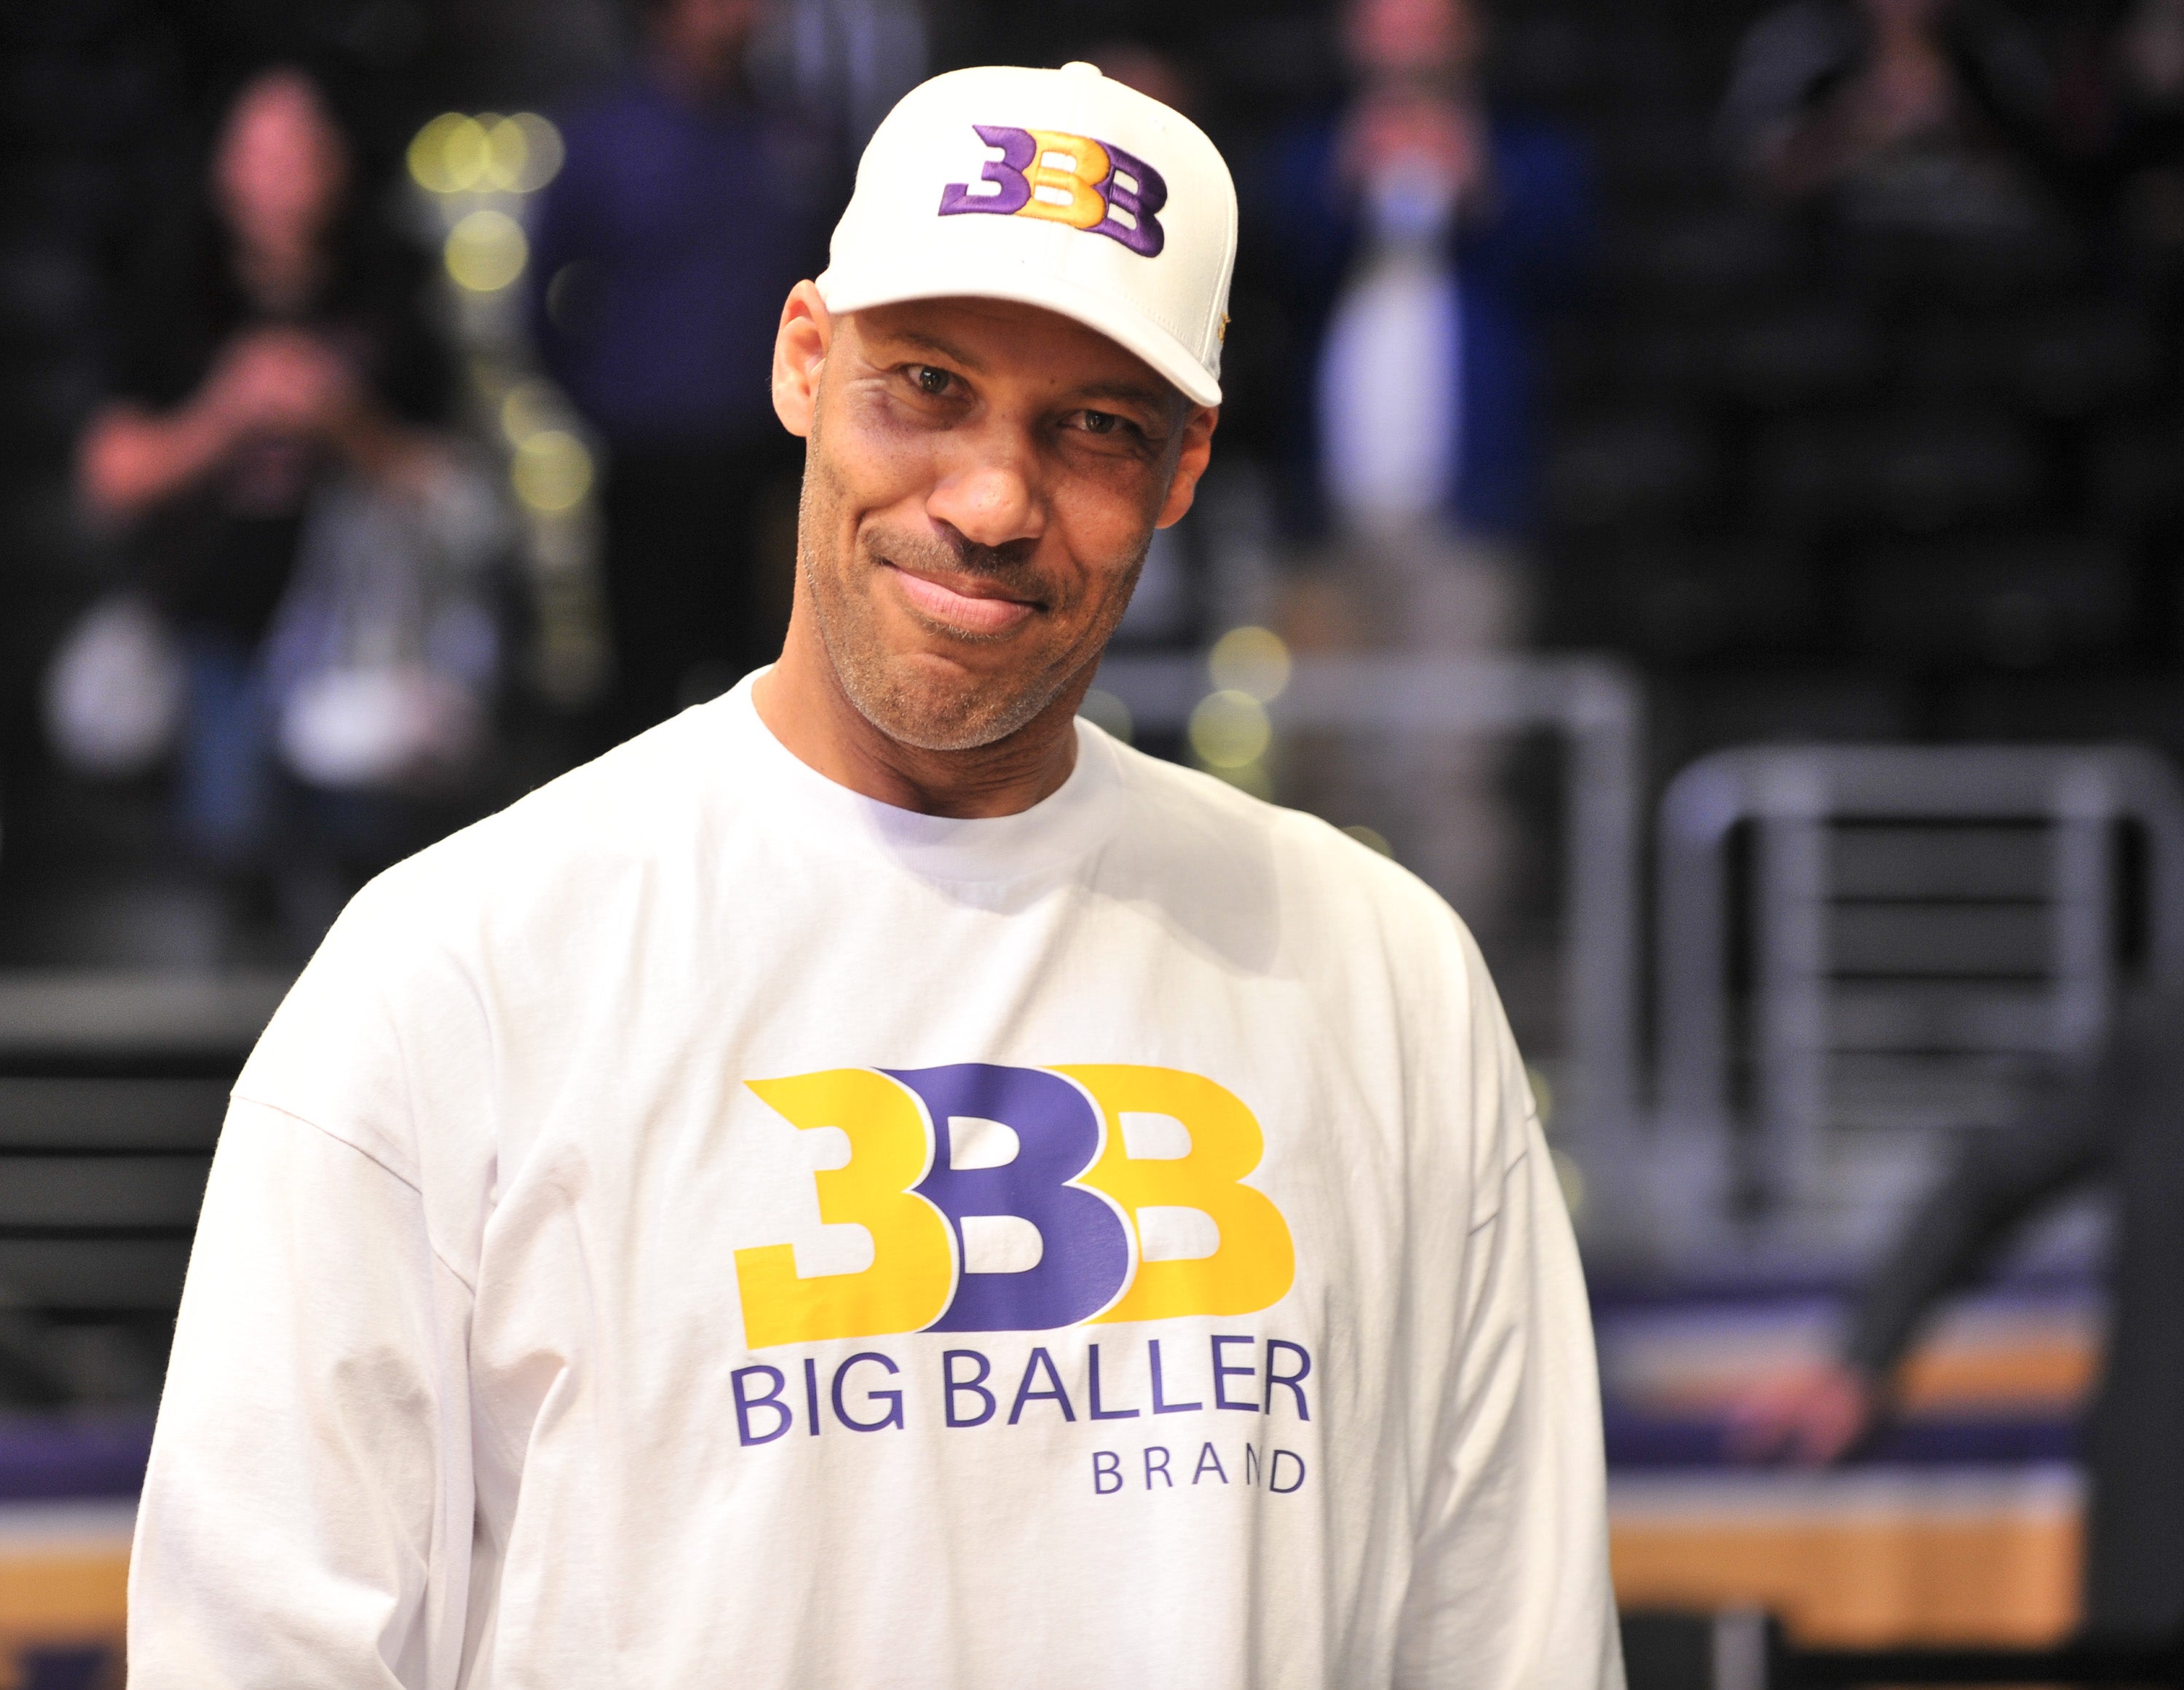 The Quick Read: There's A Little Beef Brewing Between Trump And LaVar Ball
